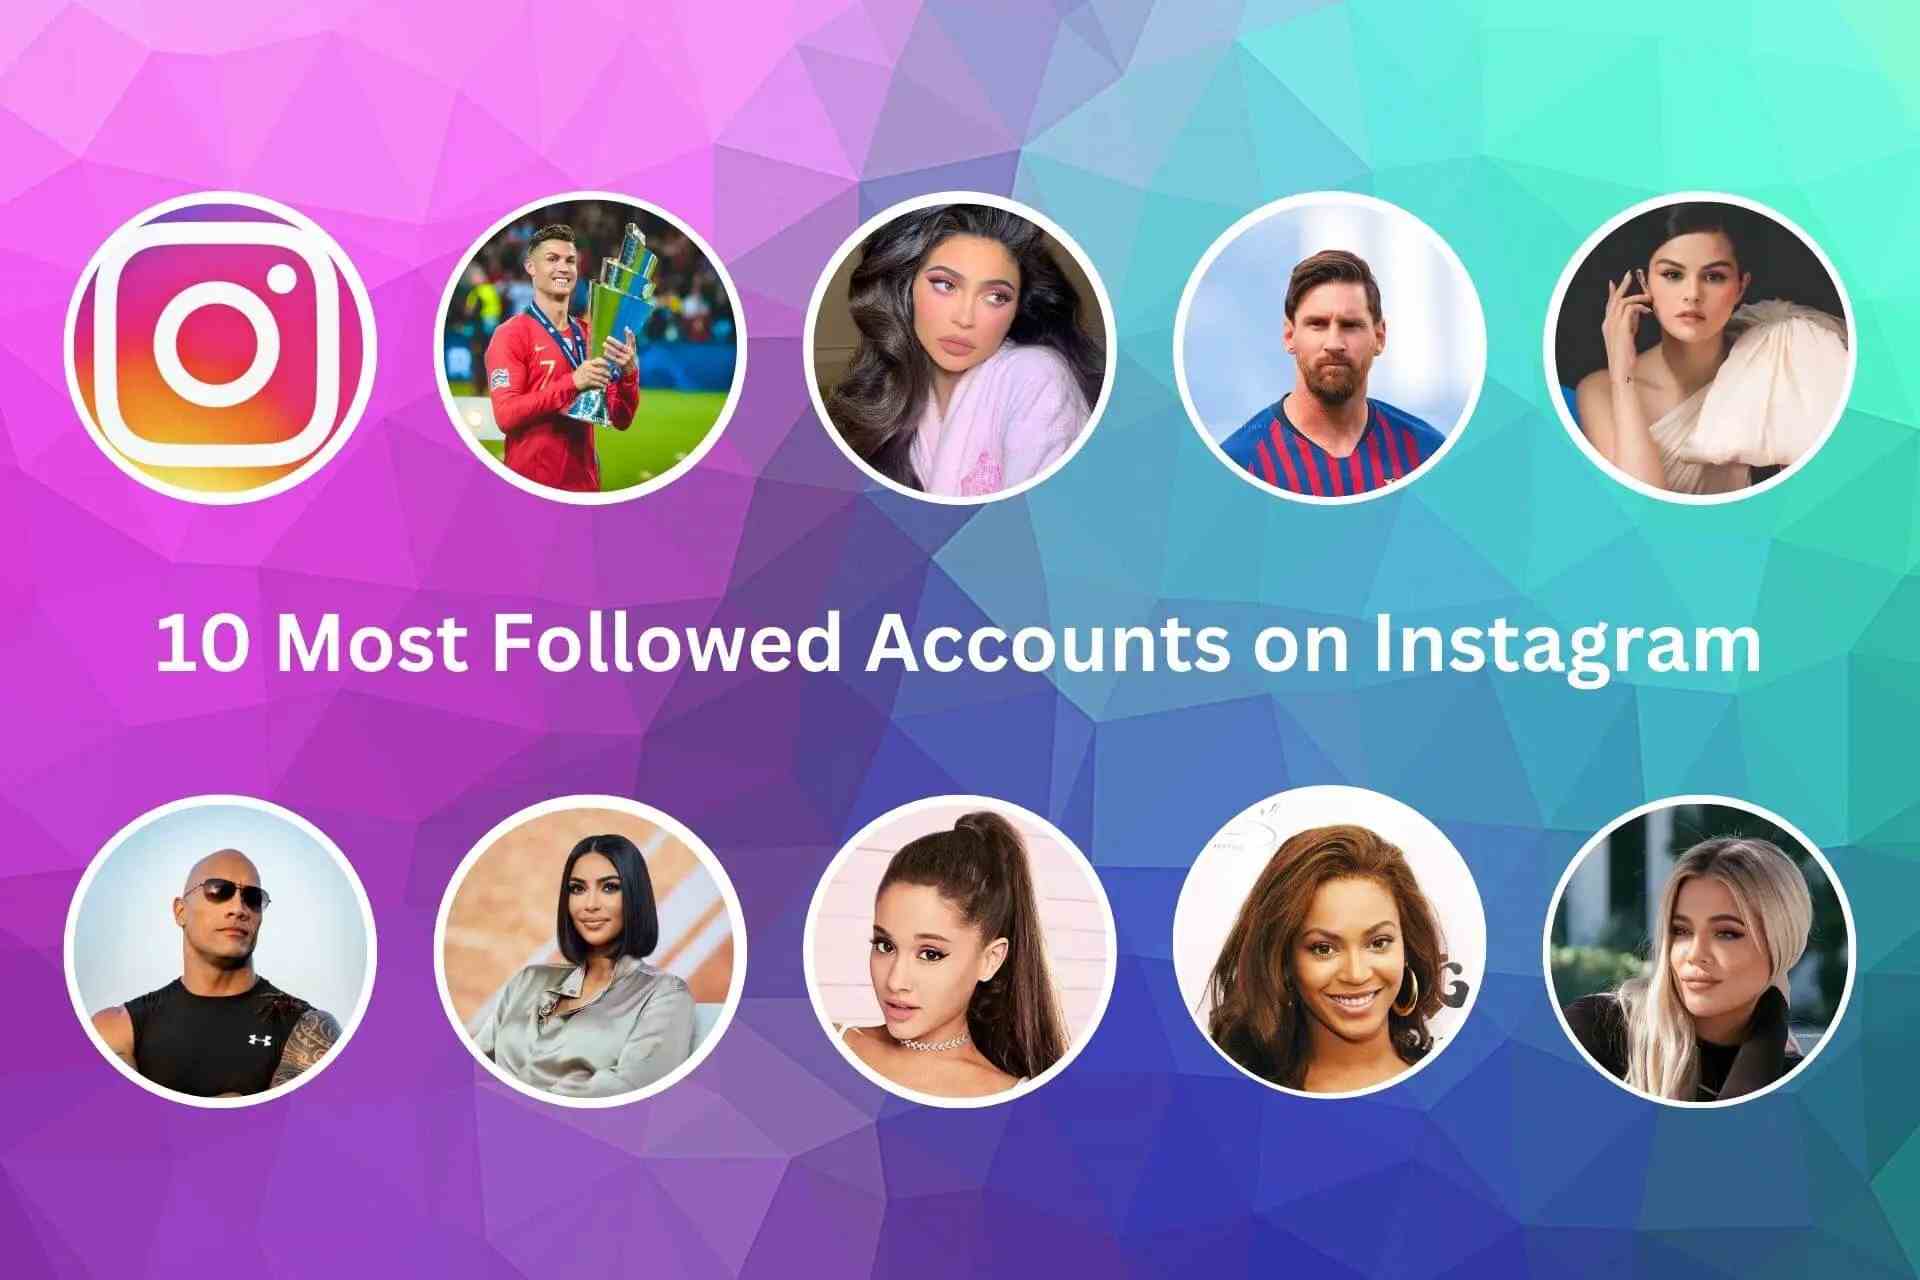 The Top 10 Most Followed Accounts on Instagram